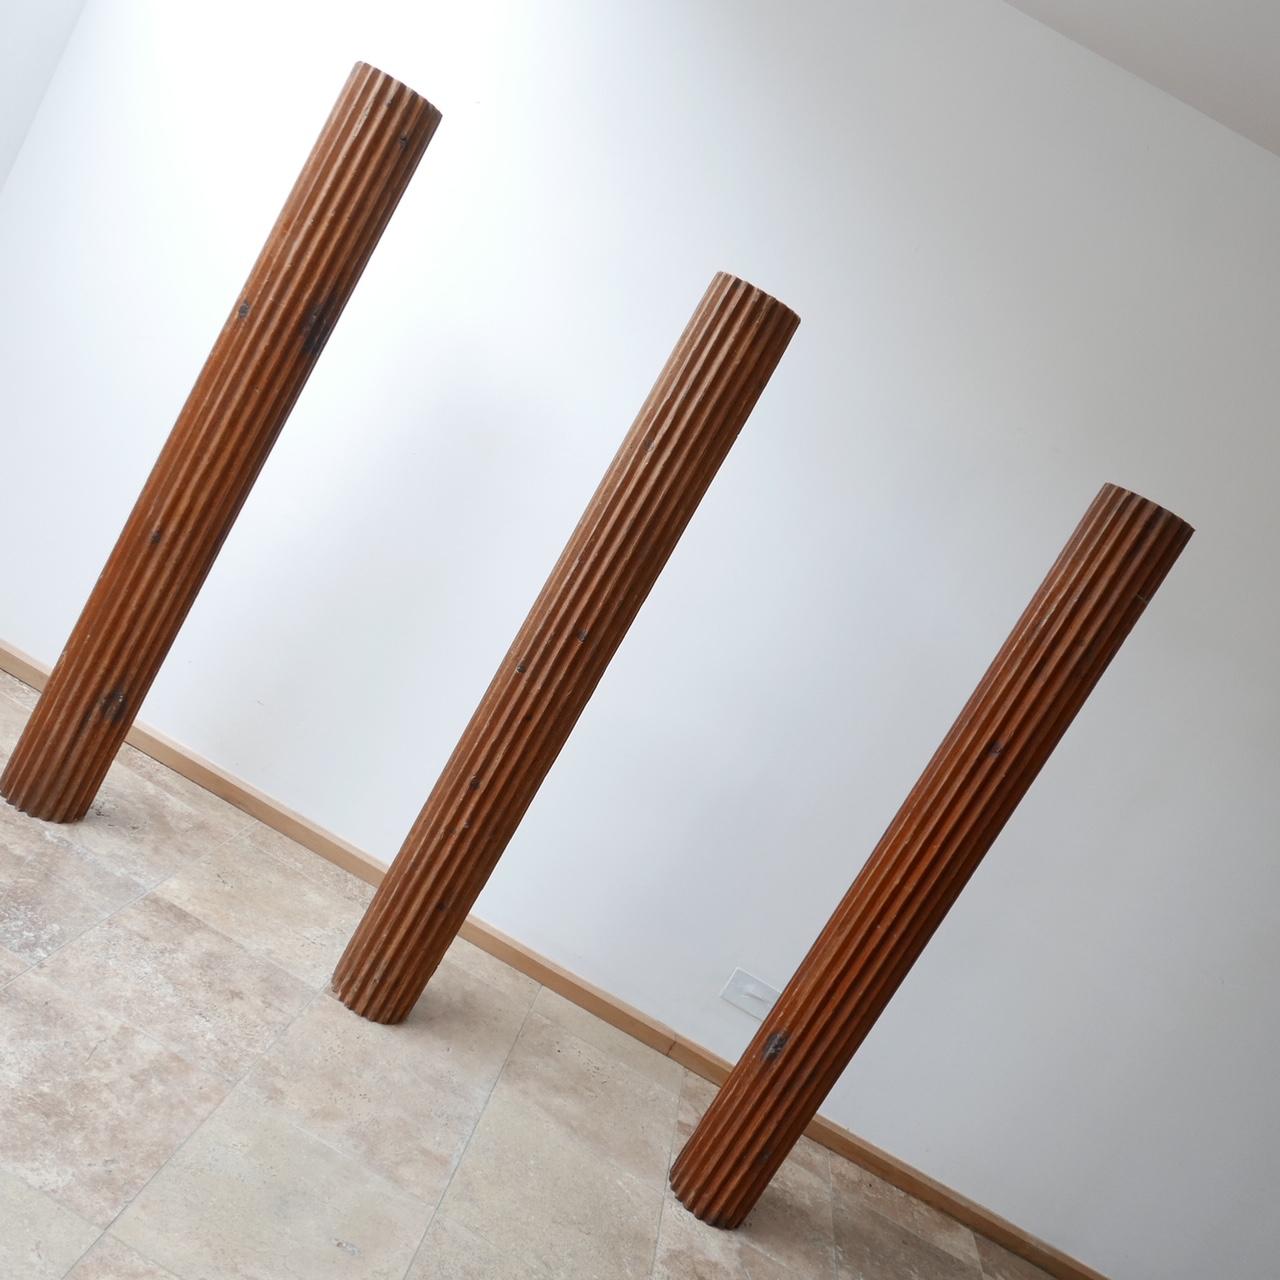 Three wooden columns, with a metal central strut running through. 

Possibly of industrial use. 

They are a matching set of three but possibly could be cut to different sizes creating more than three and making a great retail, artwork or home